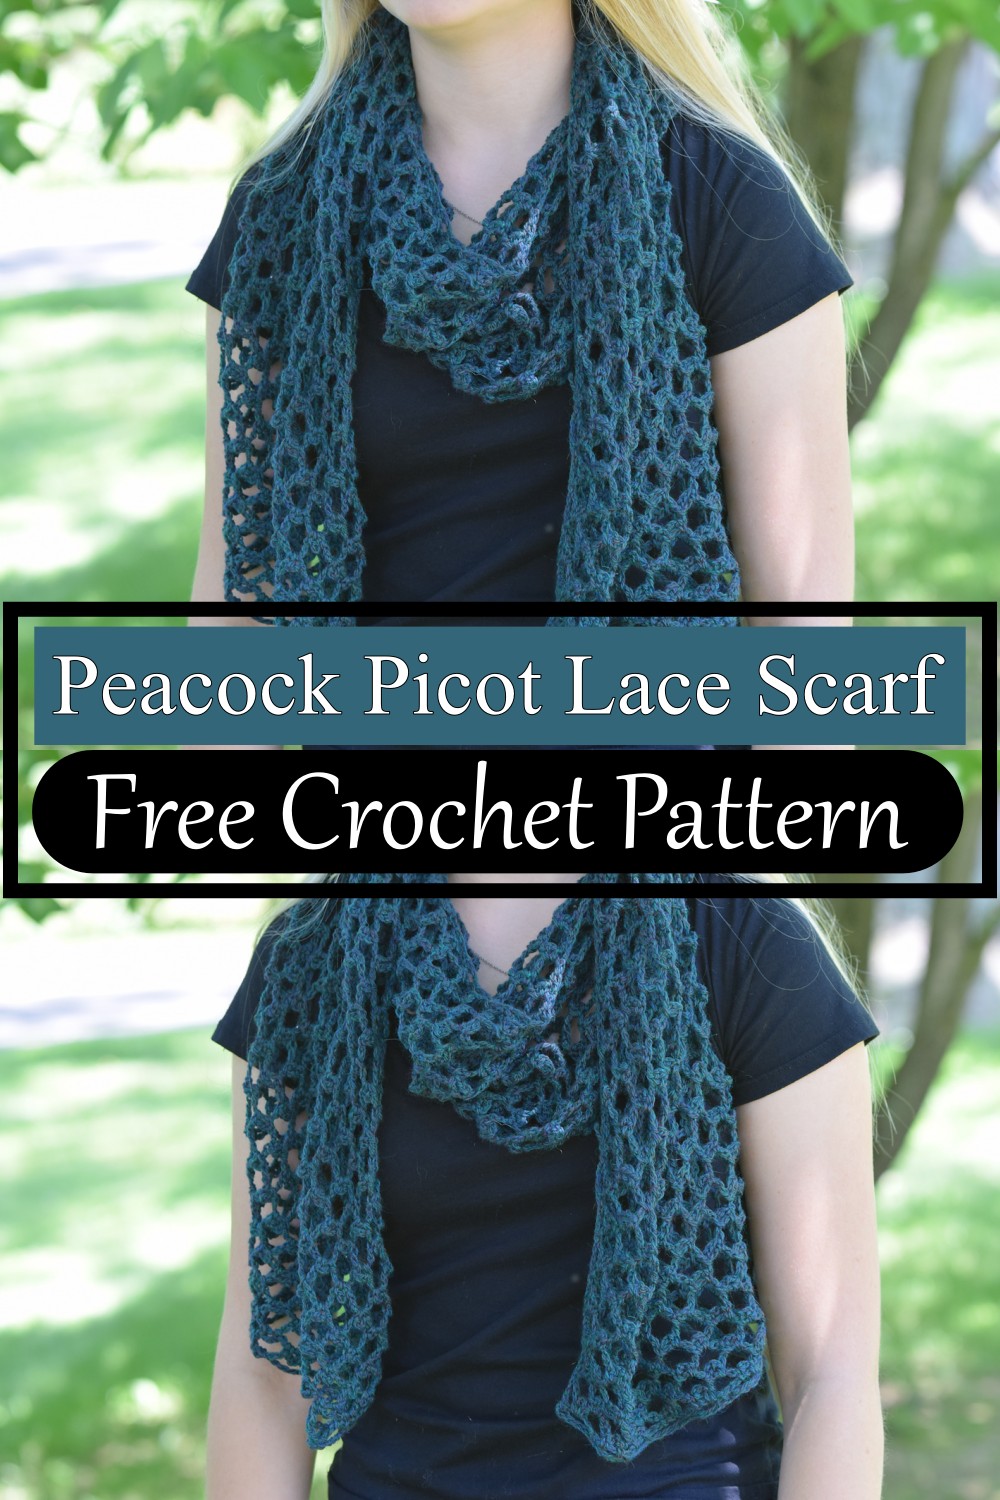 Peacock Picot Lace Scarf